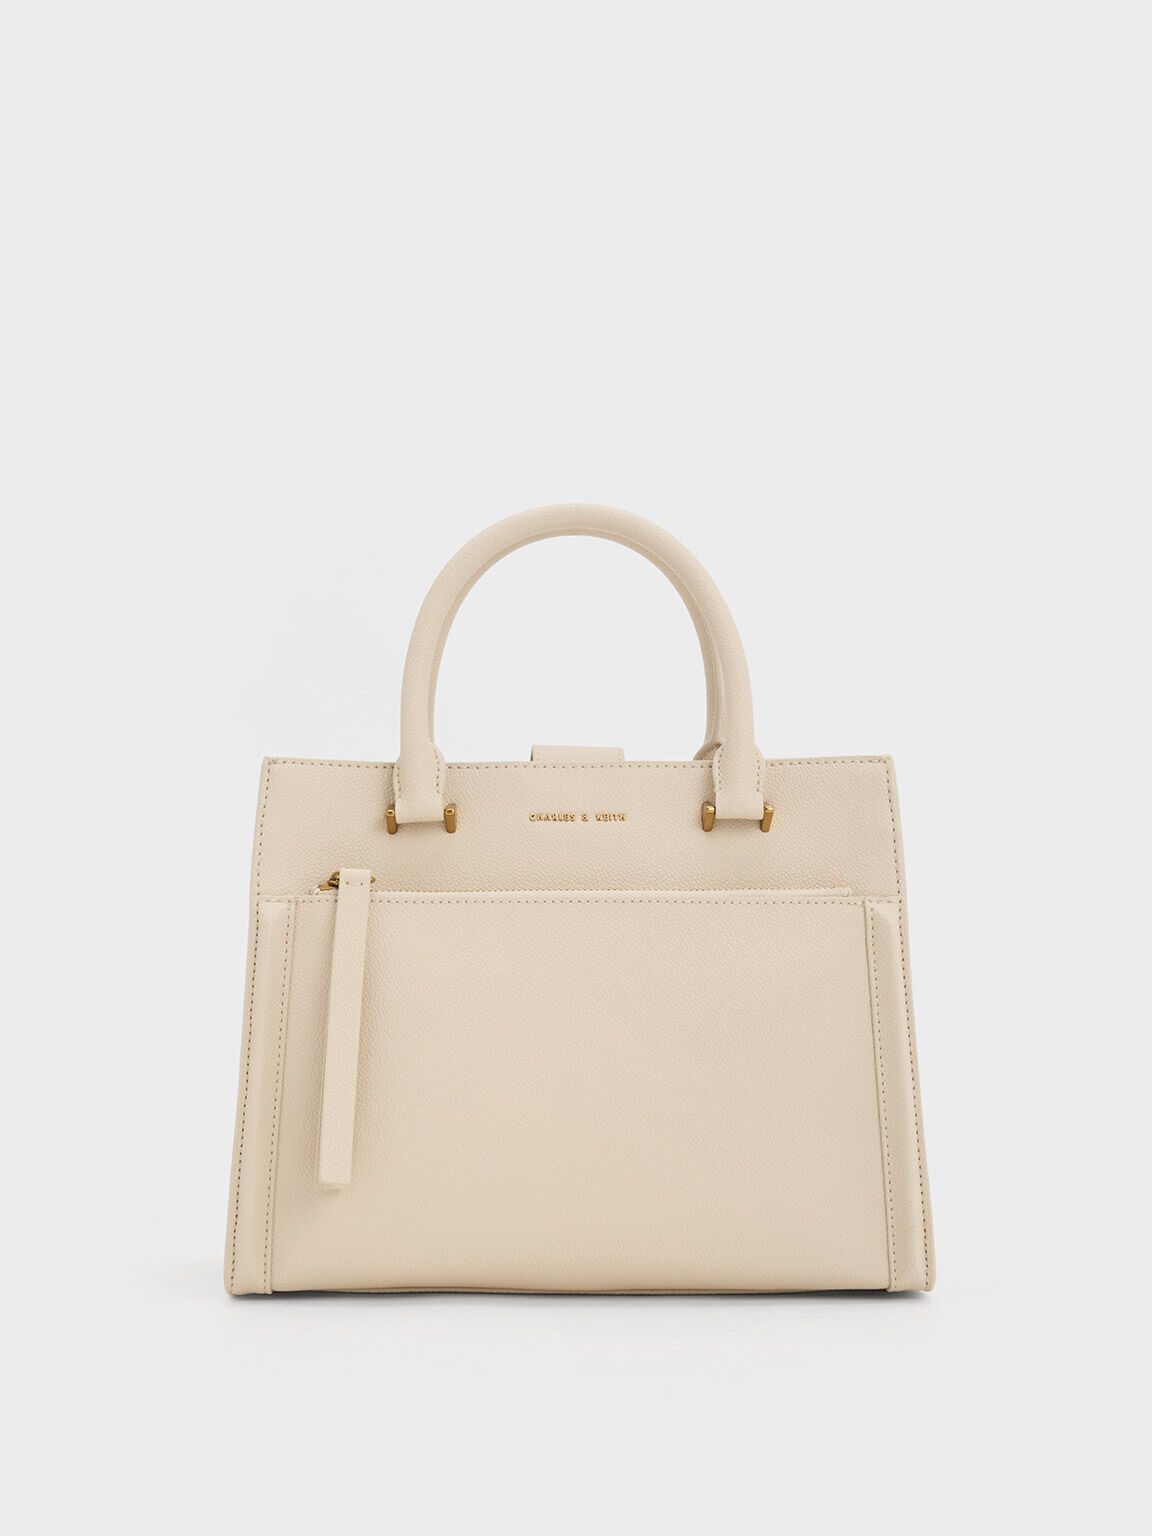 Women's Tote Bags | Shop Exclusive Styles | CHARLES & KEITH PT